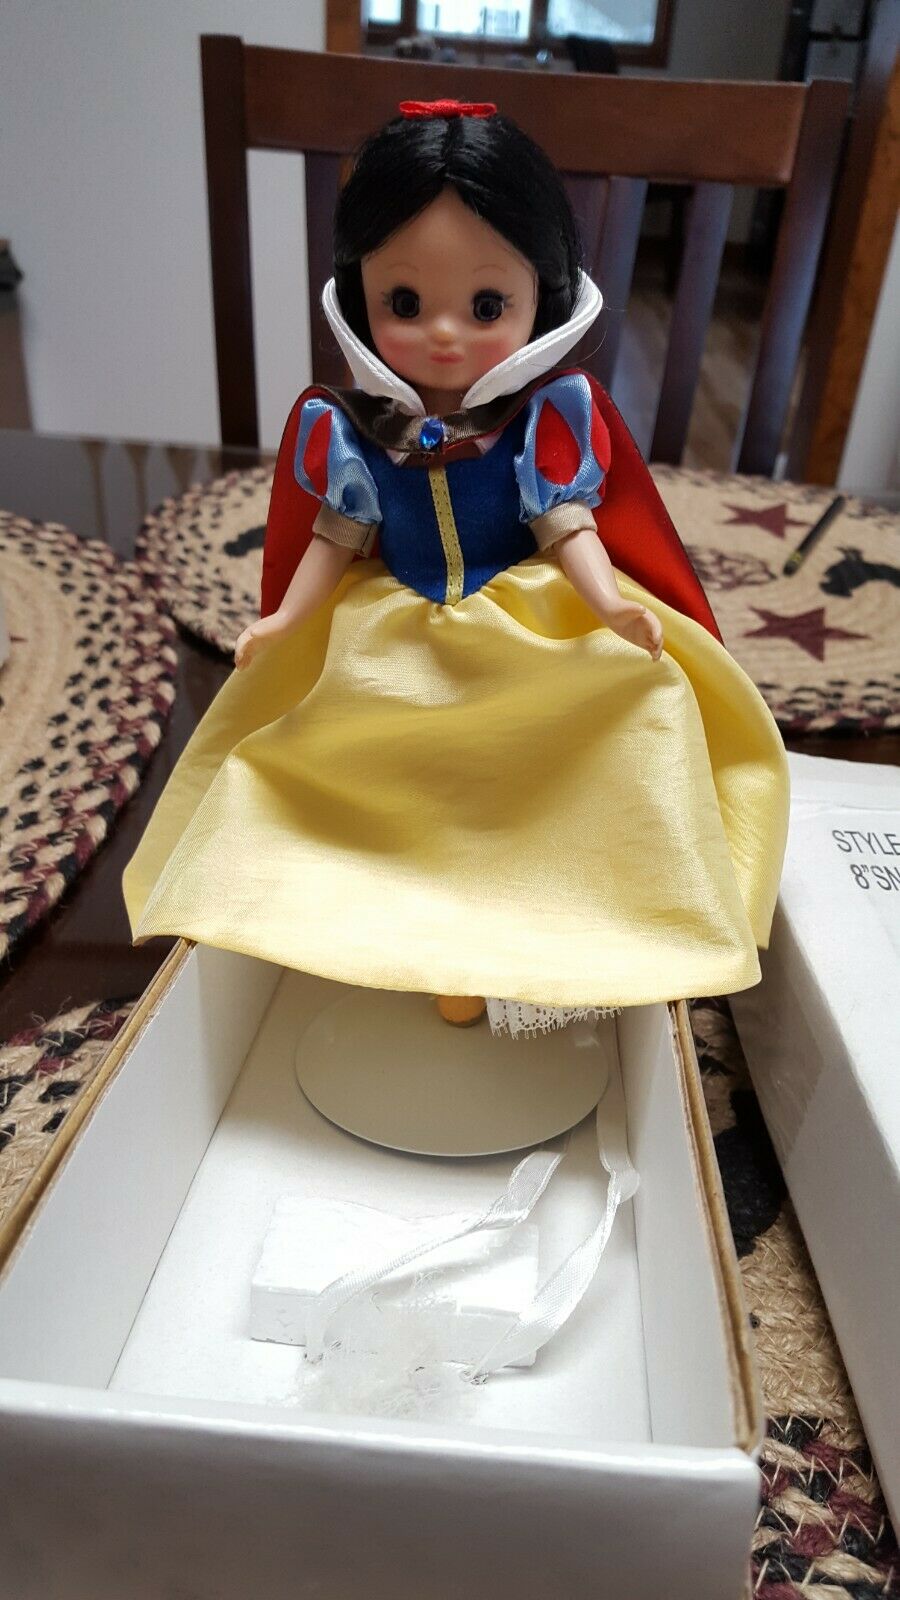 Robert Tonner Tiny Betsy Mccall Snow White Convention 2009, Limited Edition 400